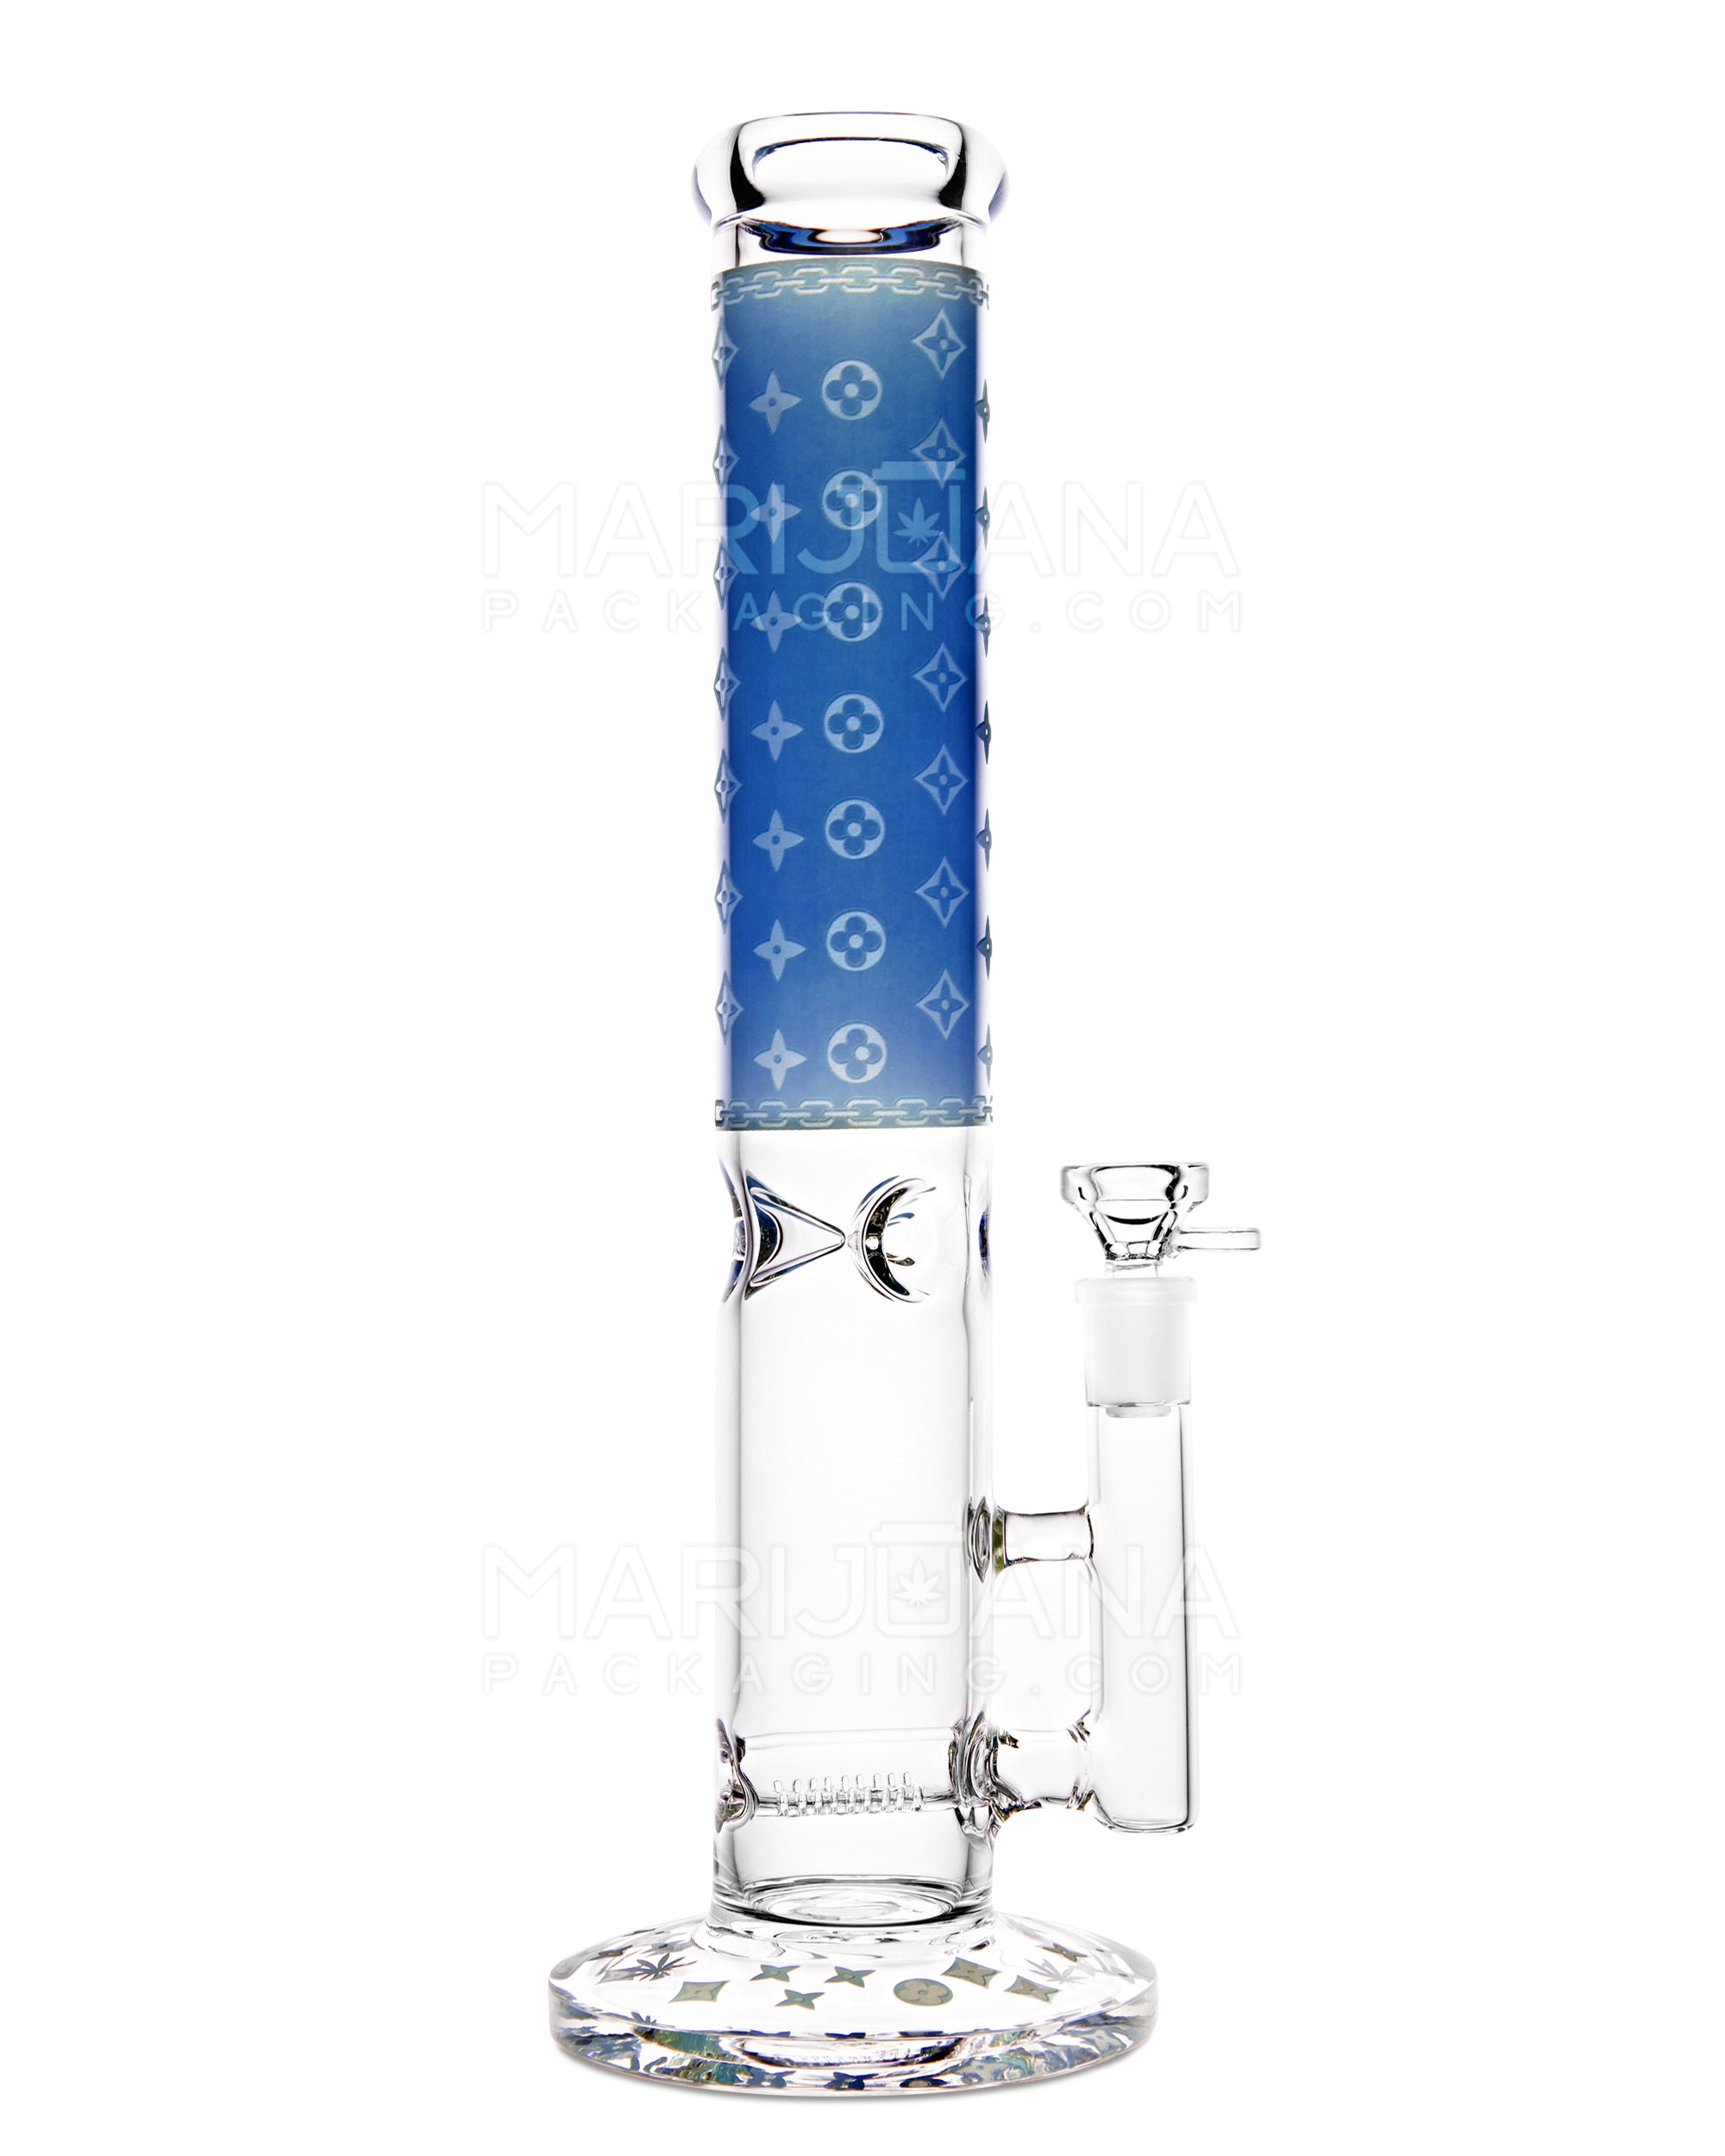 Straight Neck Luxury Design Inline Perc Glass Water Pipe w/ Ice Catcher | 14in Tall - 14mm Bowl - Blue - 5